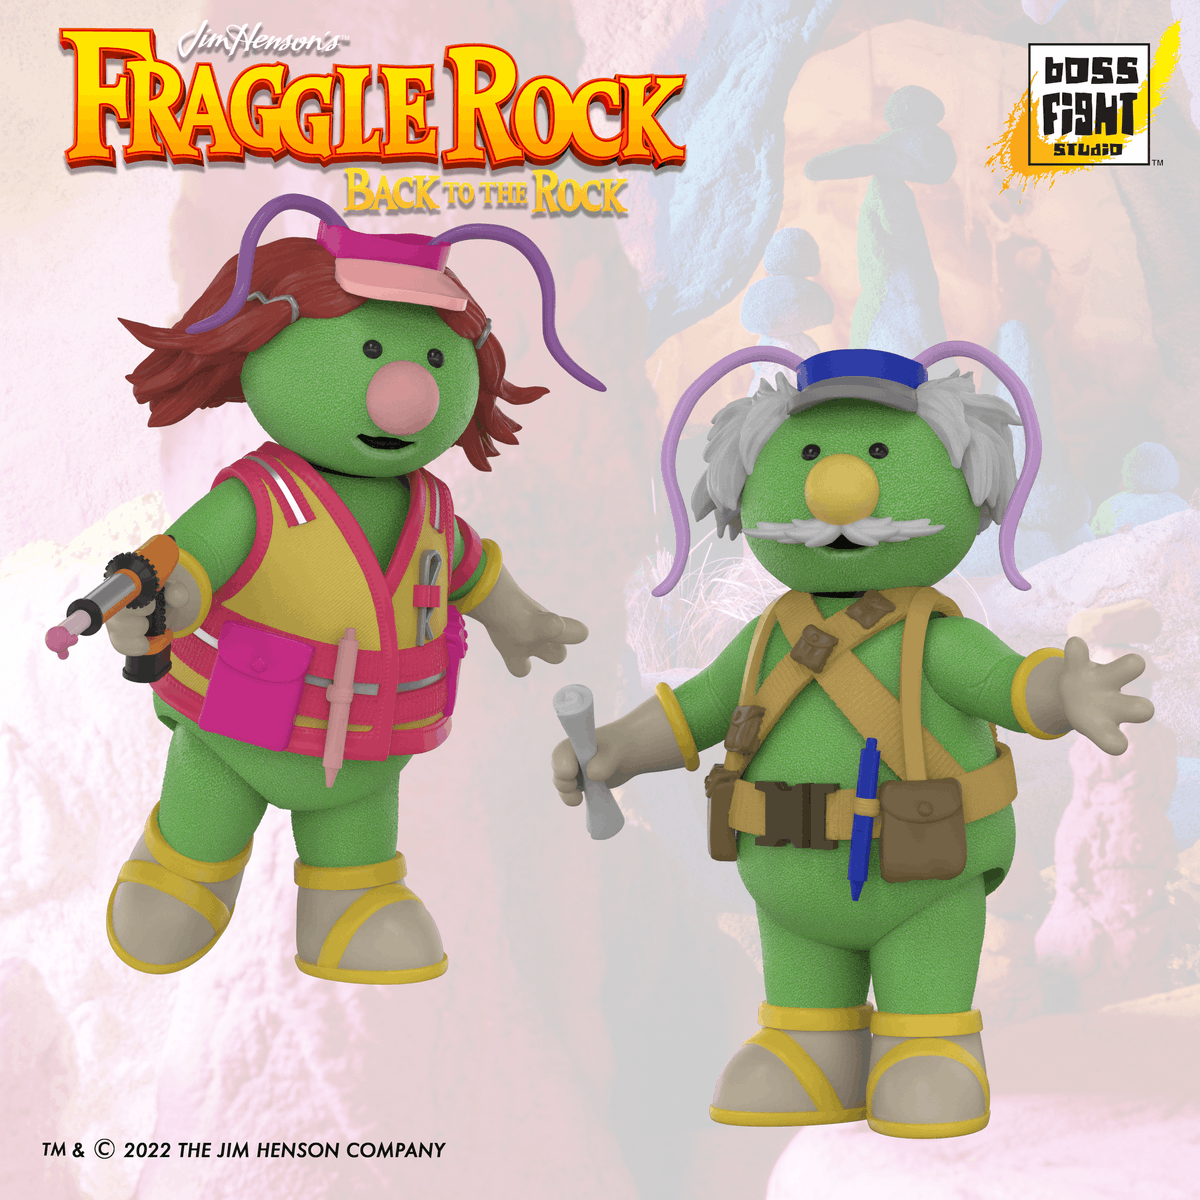 Can't wait for the Fraggle fun to begin? 🌟 Well, you're in luck! Flange #Doozer is in stock and ready to help you build wonders NOW! Architect and Cotterpin are arriving soon. Don't miss out on the fun! tinyurl.com/26hdxb6h #Fraggles #FraggleRock #FraggleRockBacktotheRock